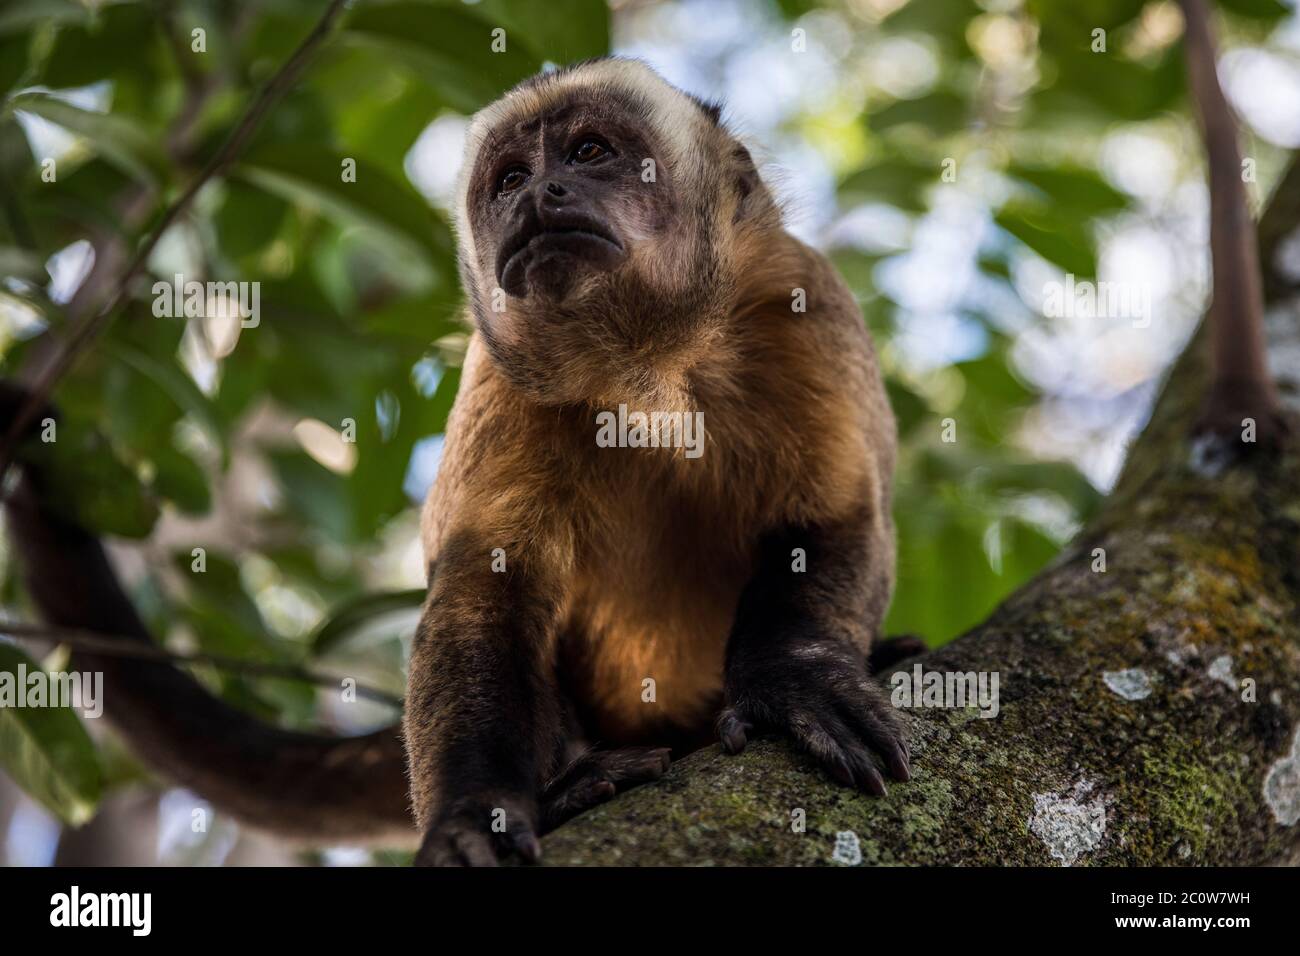 monkey on a tree in the forest Stock Photo